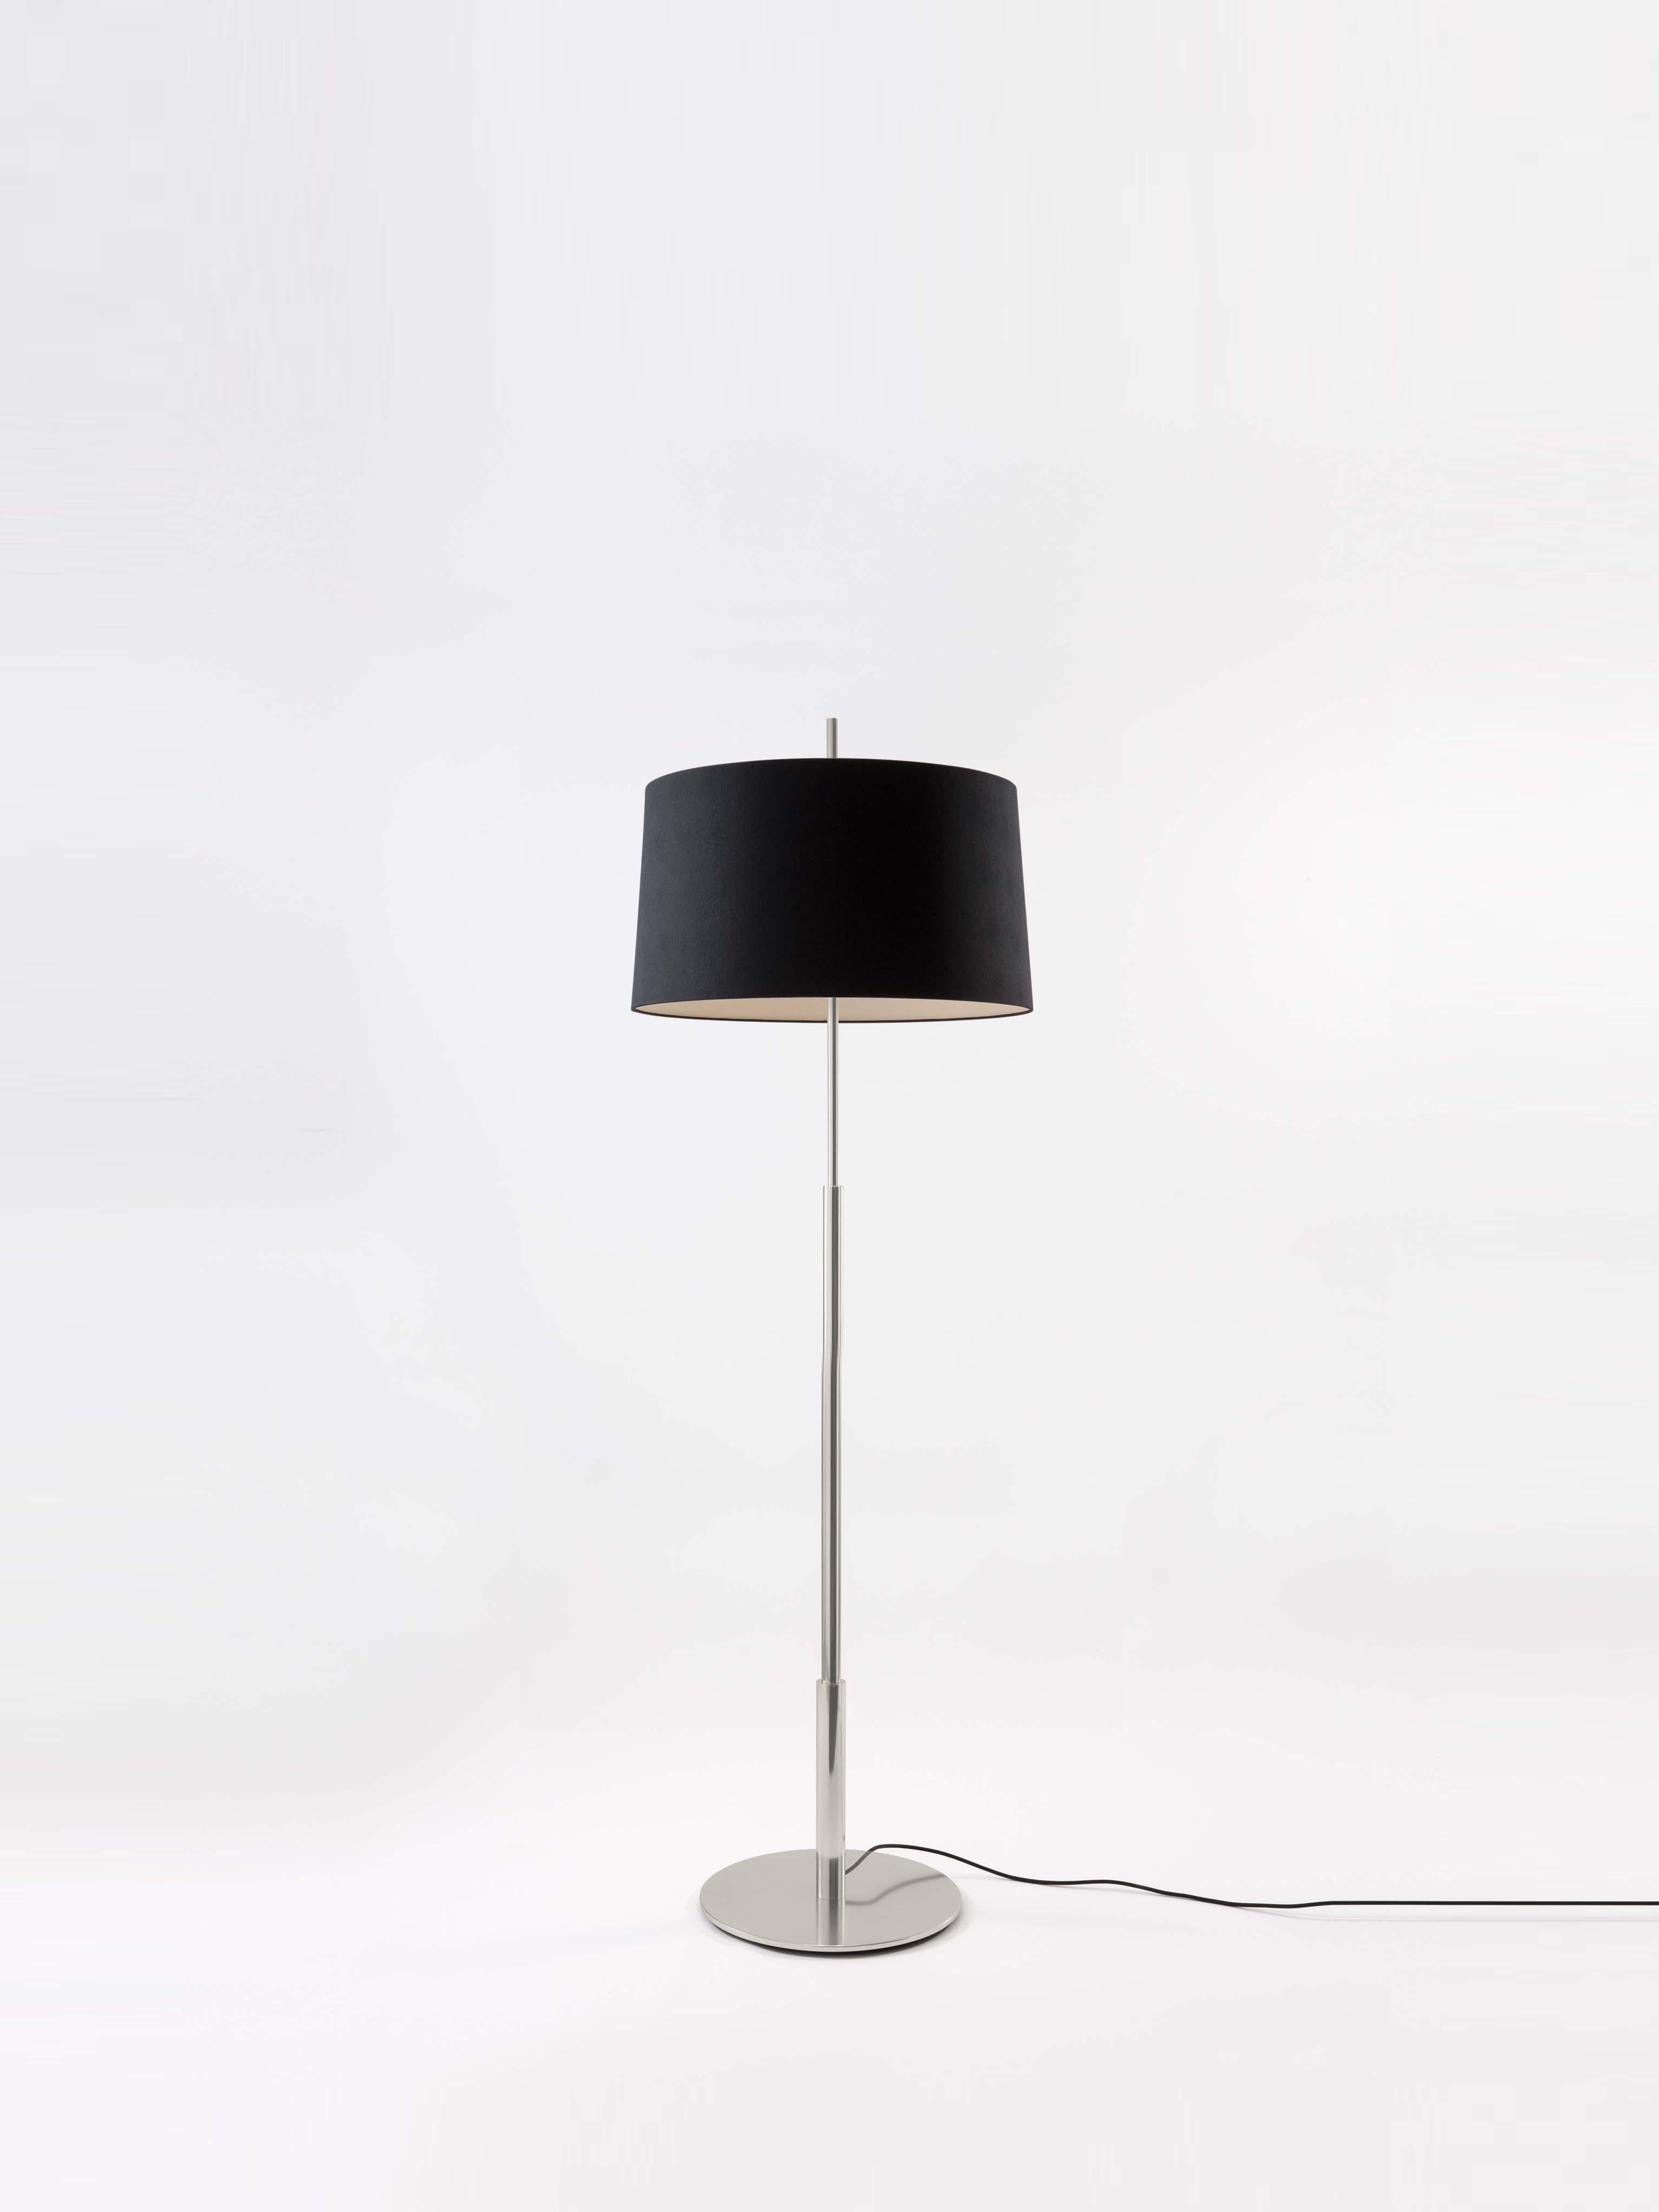 Nickel Diana floor lamp by Federico Correa, Alfonso Milá, Miguel Milá
Dimensions: D 45 x H 146 cm
Materials: Metal, linen.
Available in nickel or gold and in black or white shade.

In keeping with the calling of its creators, the Diana lamp has